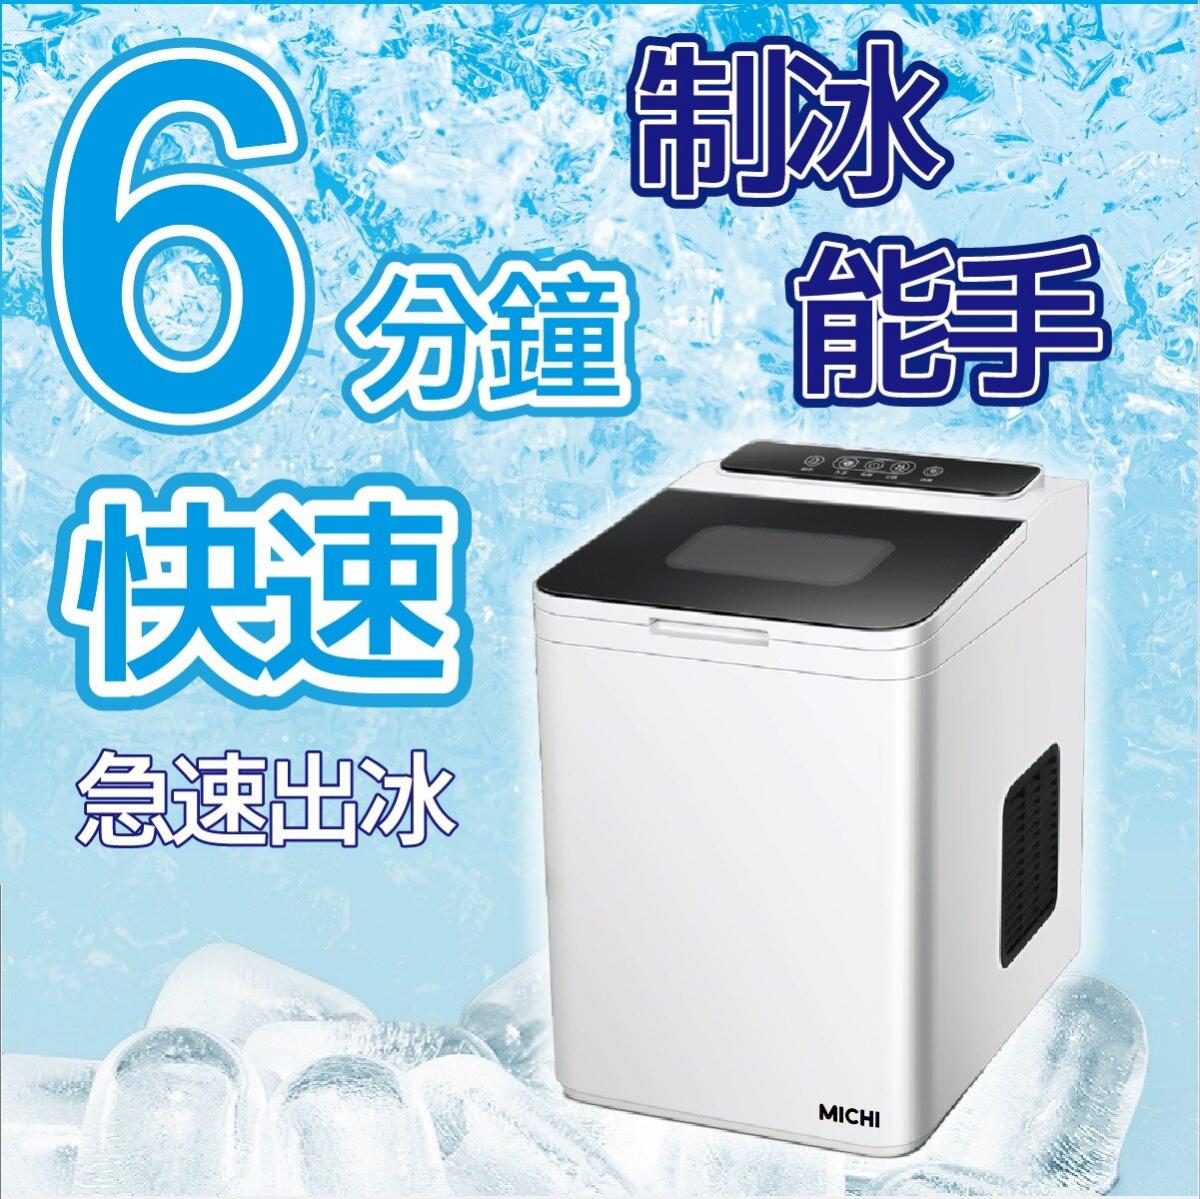 Michi - ICE TOUCH ultra-small household ice machine｜ice machine｜bullet ice cubes｜ice pellets